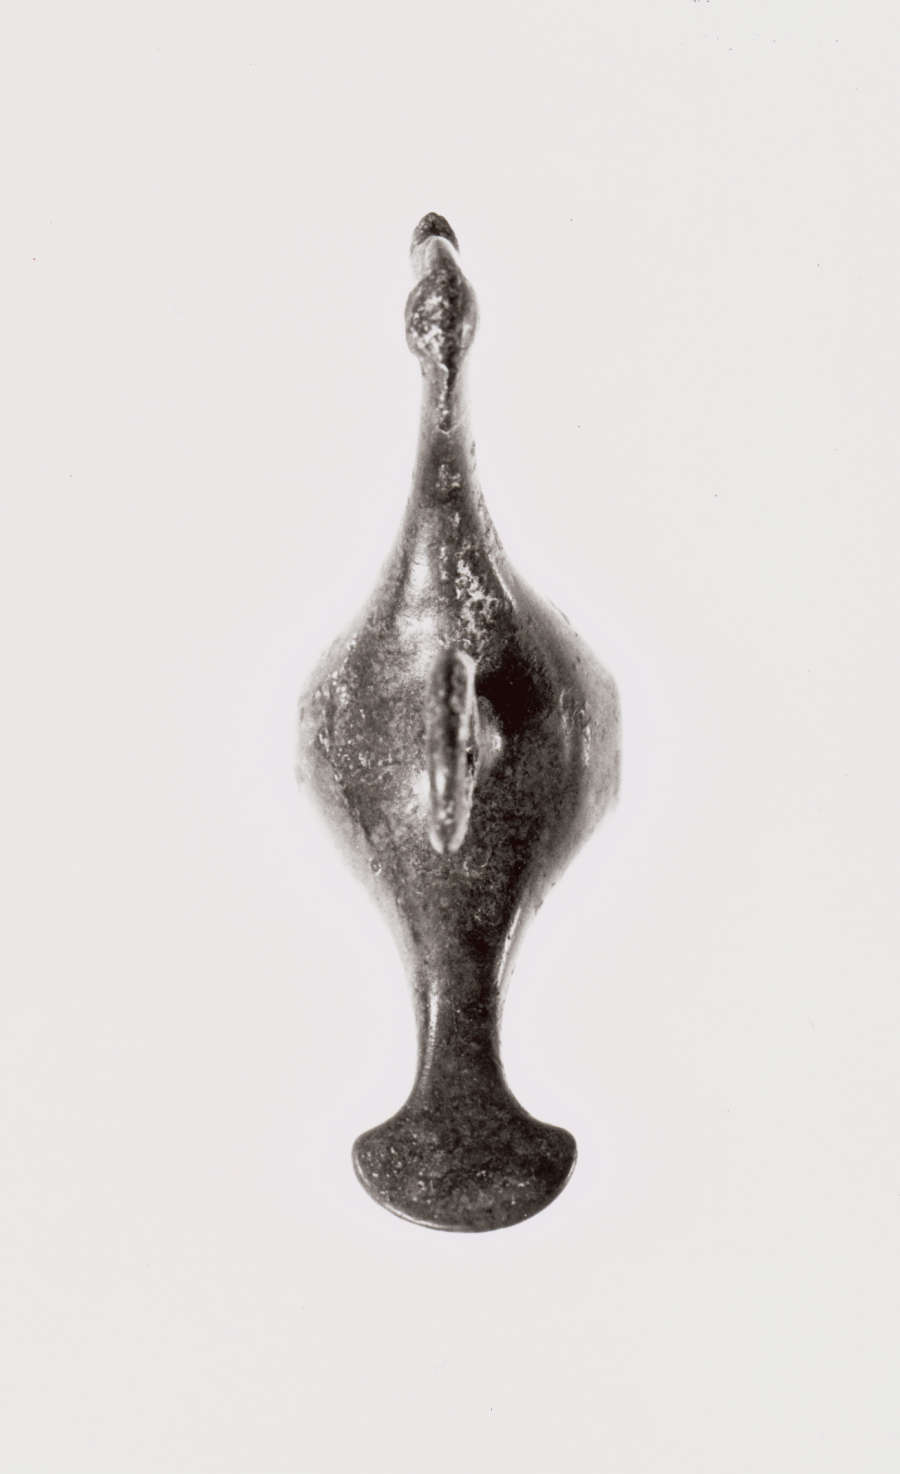 Top view of a silver figurine of a bird, with a large round bellow and thin slender neck, and tail that narrows and flares outwards. 